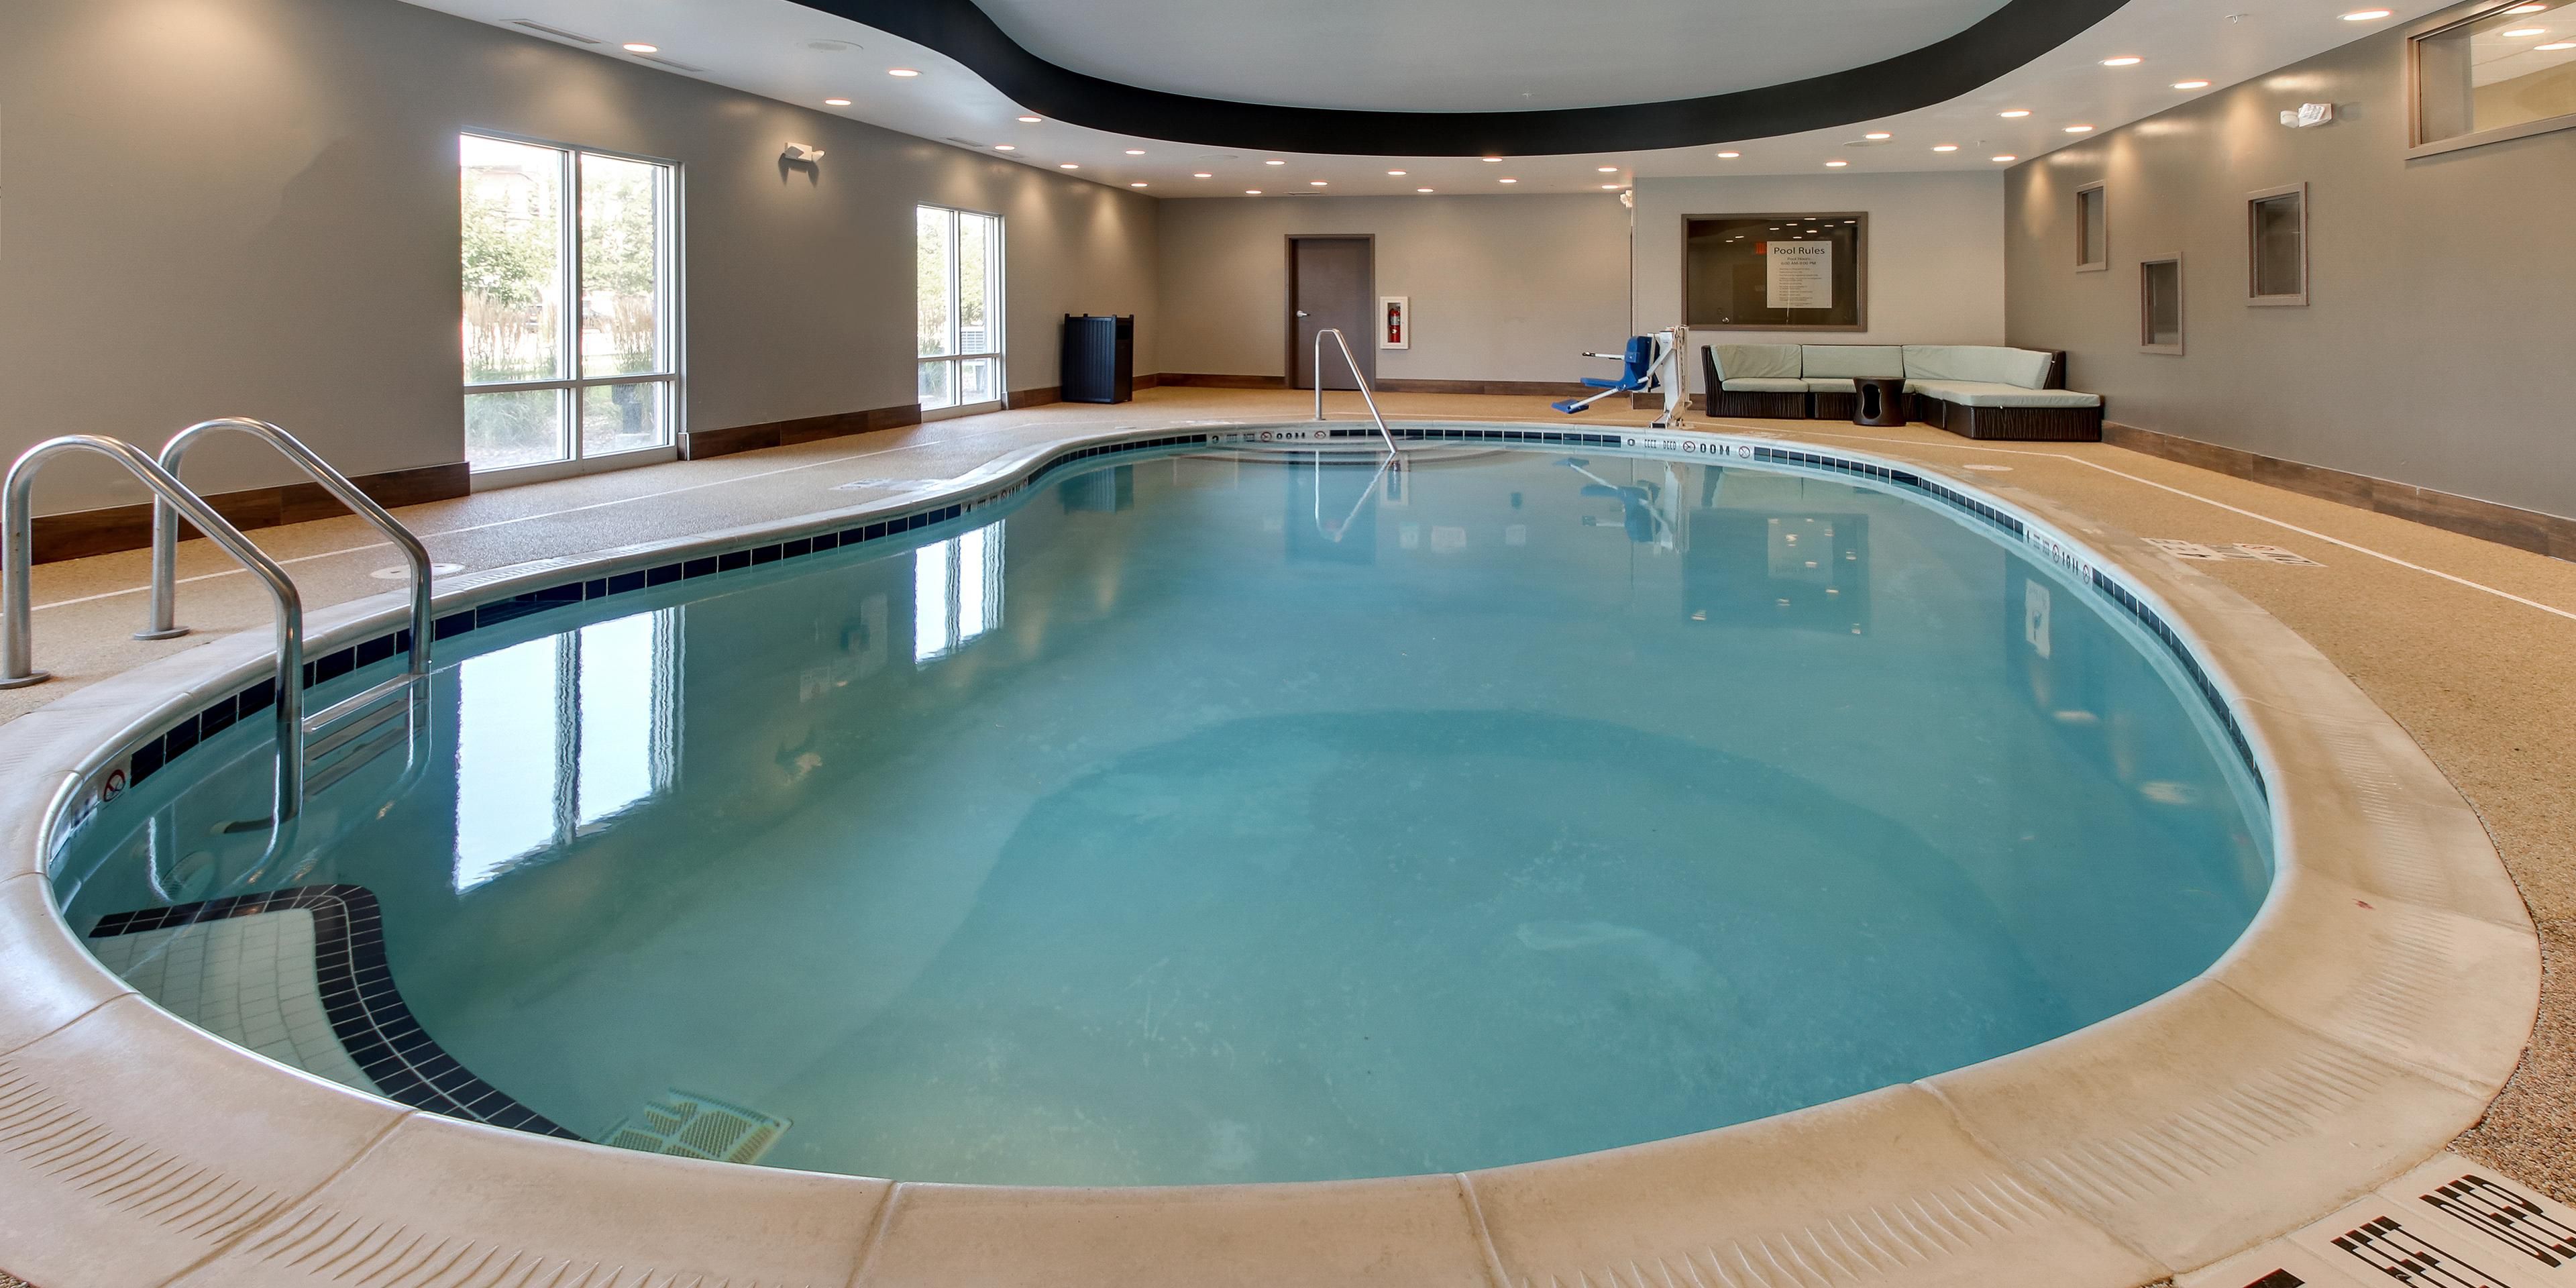 Stop in at the desk, as we are following all State & Local COVID guidelines for your safety! Our HEATED SALT WATER pool is designed to make any kid smile and business traveler unwind from an active day. Fresh towels are always on hand and don't forget to visit our Wellness Station in the hotel lobby, complete with healthy snacks and sports drinks.